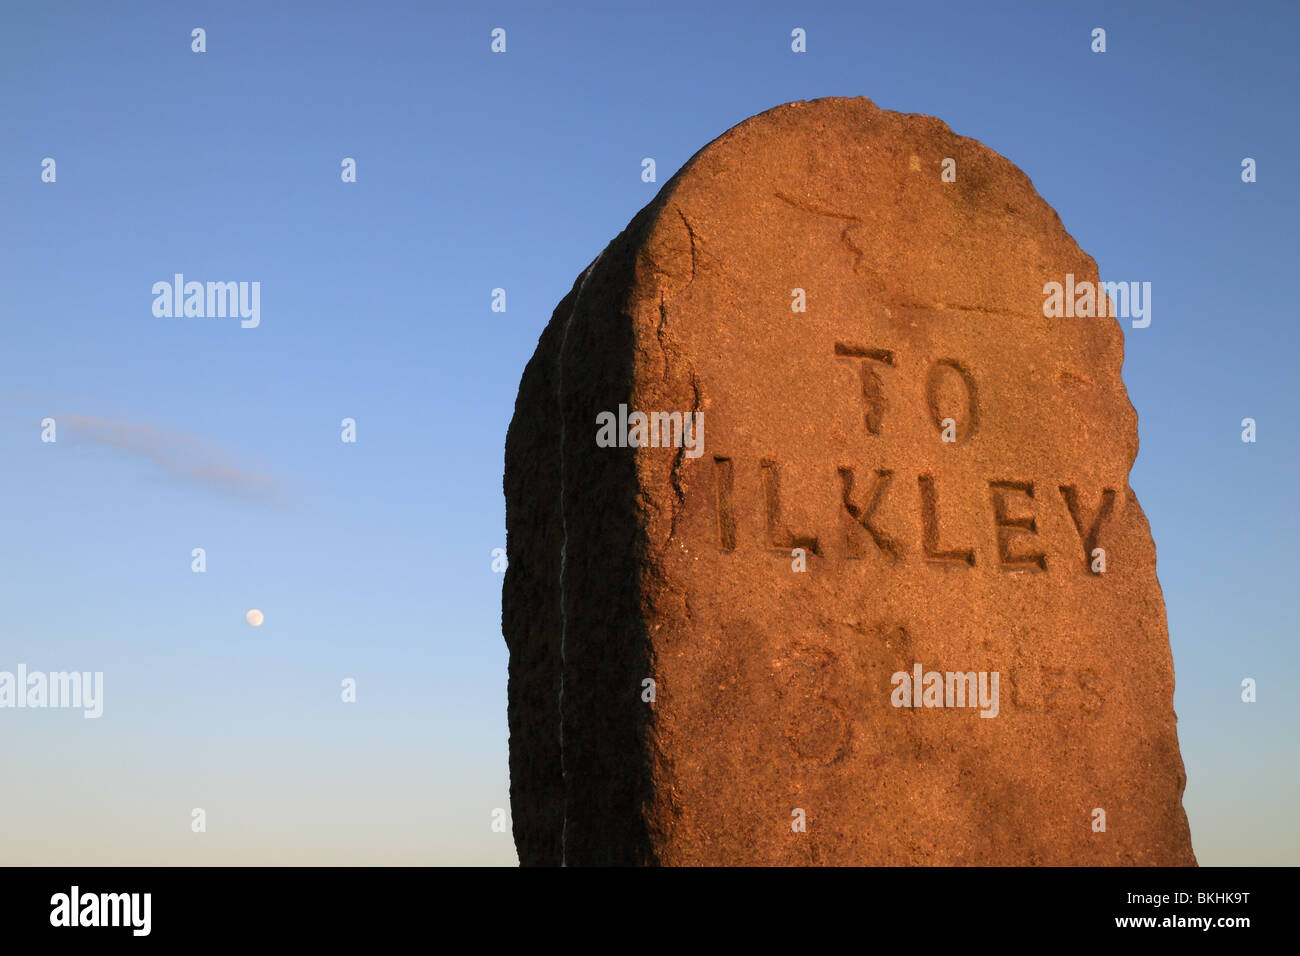 The moon rises over a stone signpost or milestone on "Rombolds" or Ilkley Moor, in West Yorkshire, England, UK Stock Photo